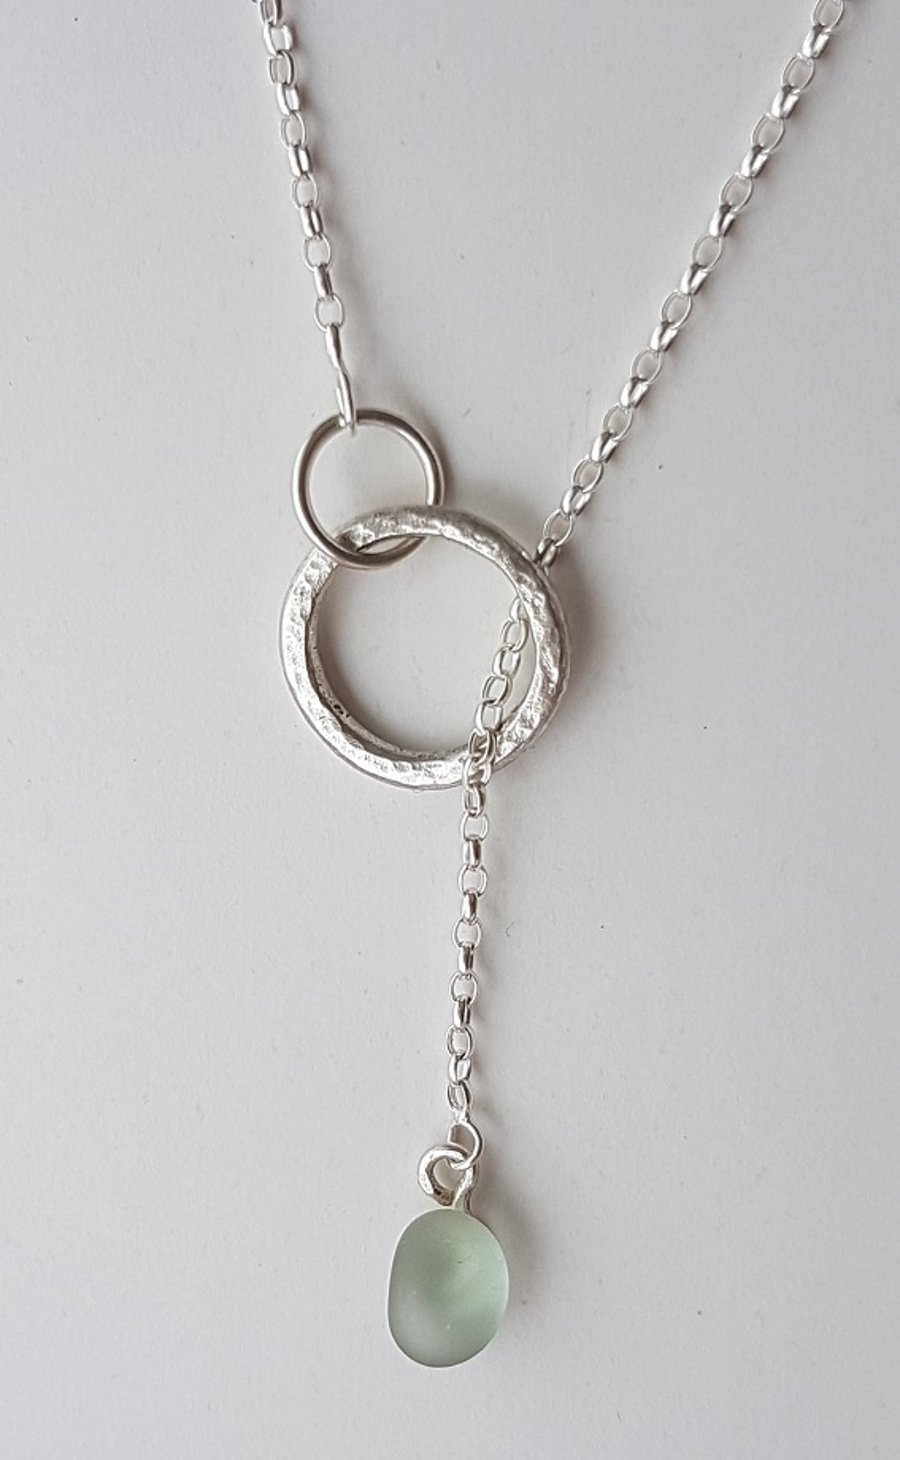 Seaglass Pendant on 20" Sterling Chain with Hammered Circle